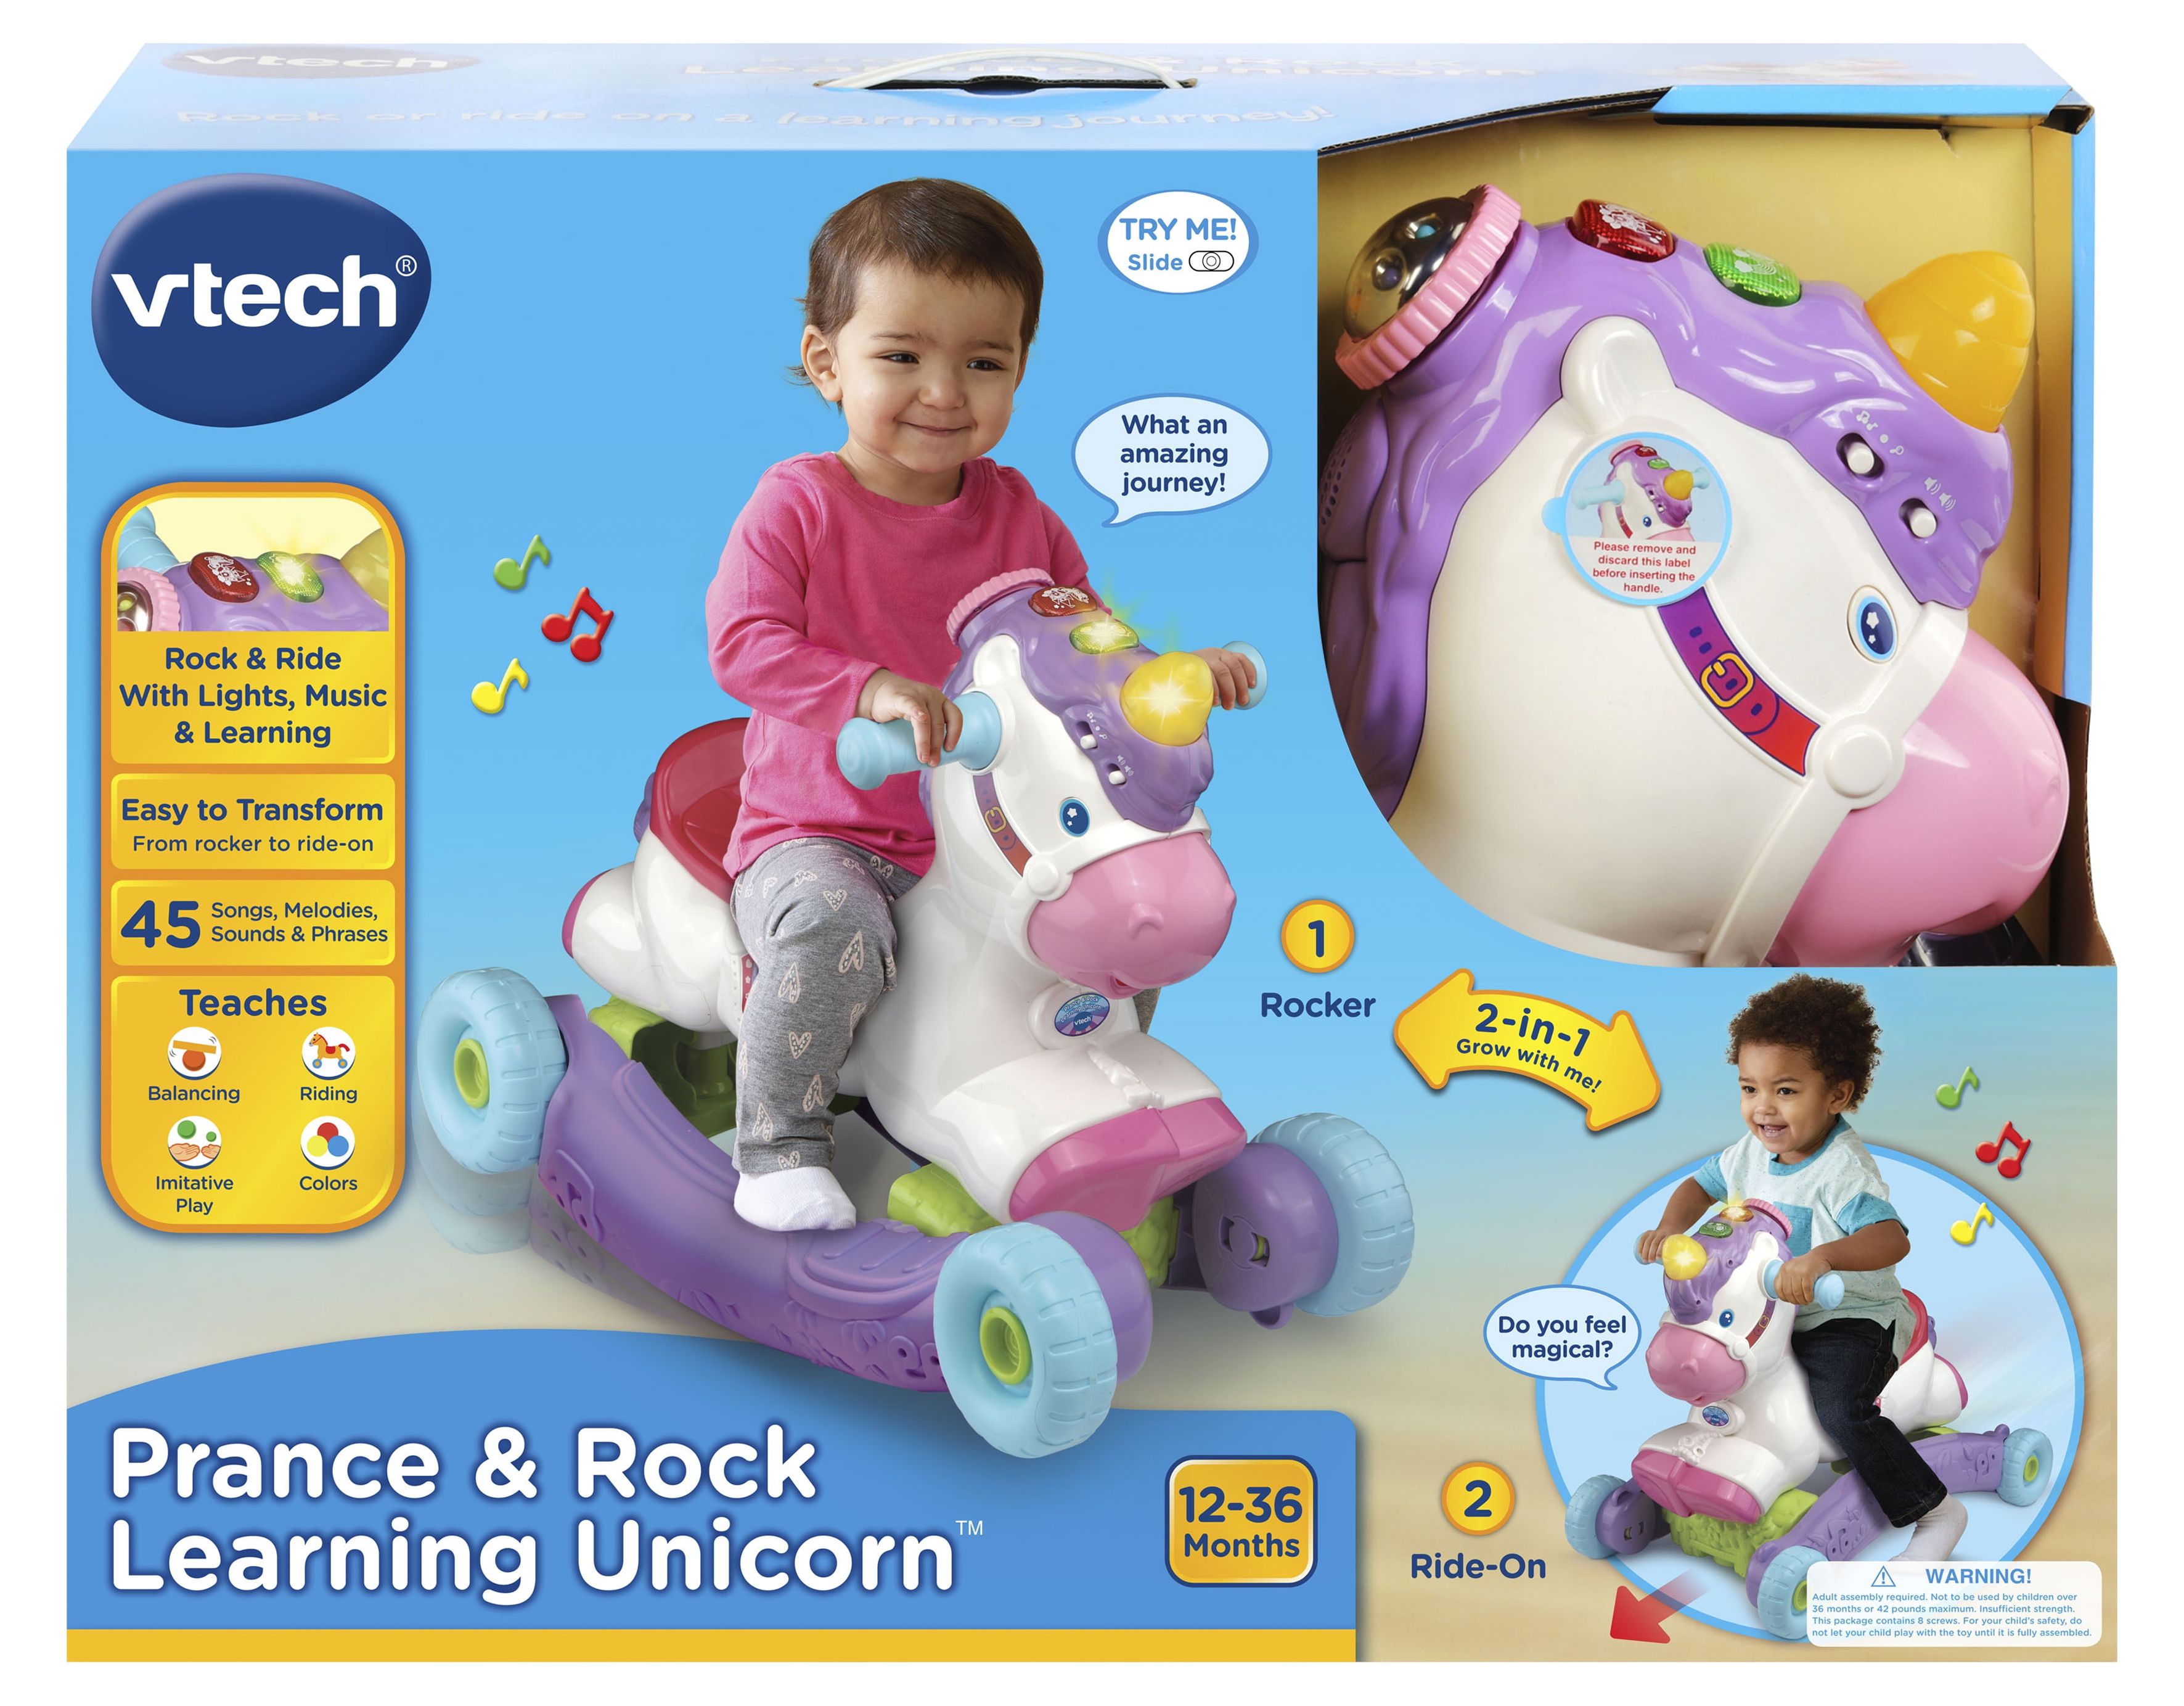 VTech Prance and Rock Learning Unicorn, Rocker to Rider Toy, Motion-Activated Responses - image 14 of 14